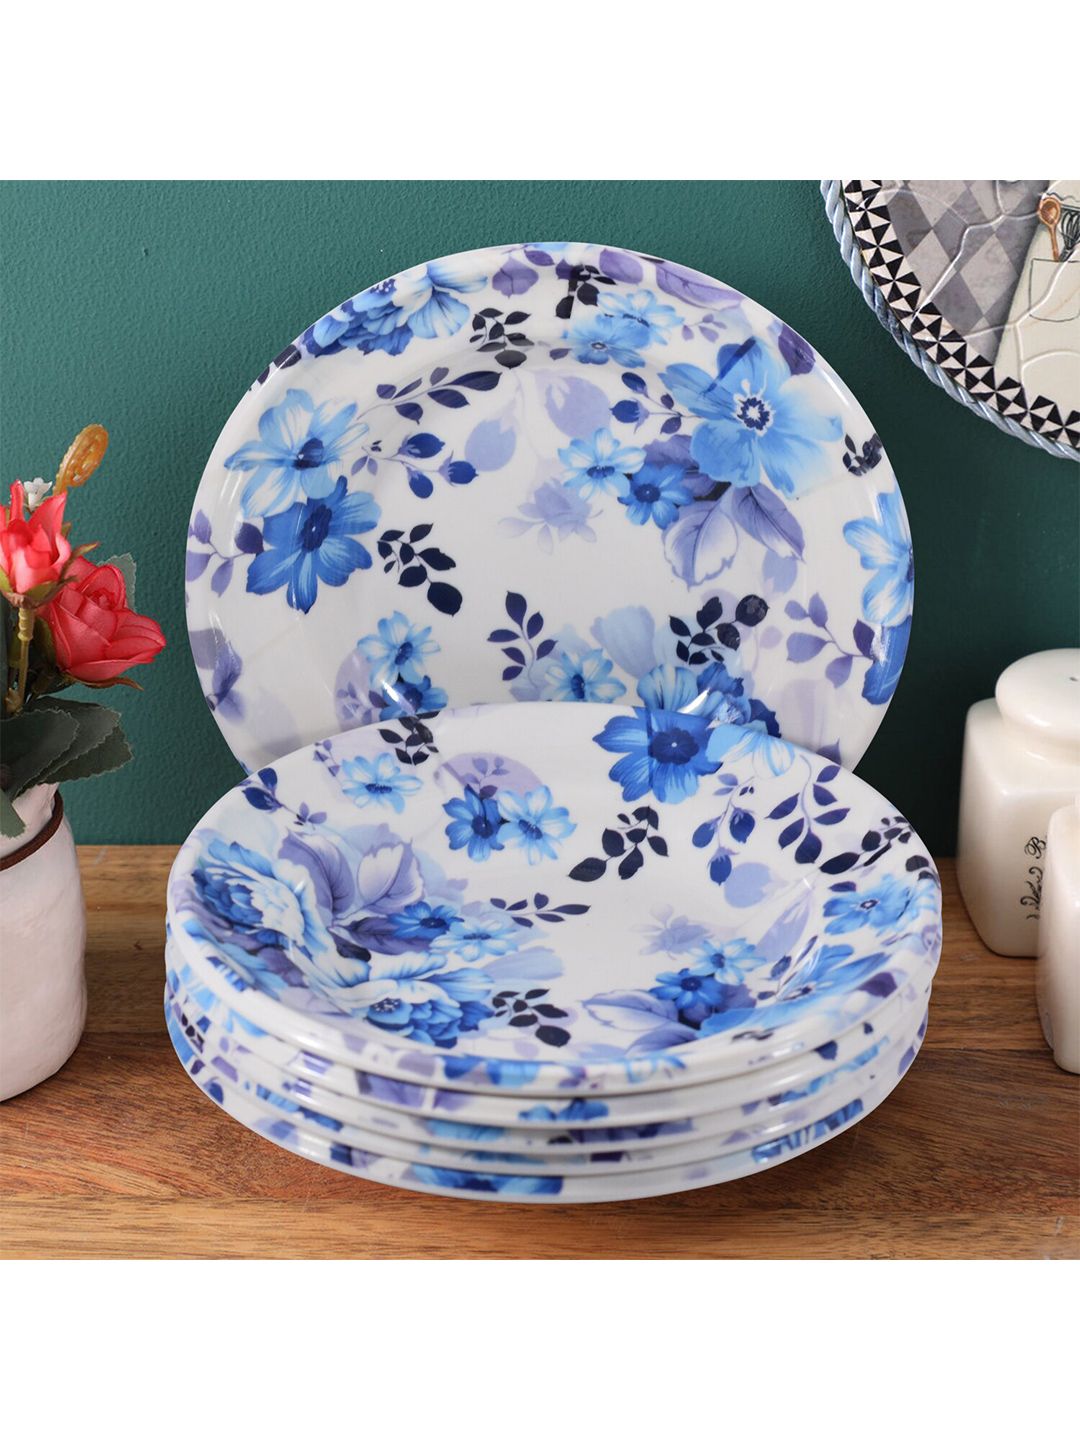 Gallery99 Set of 6 White & Blue Floral Printed Melamine Glossy Plates Price in India